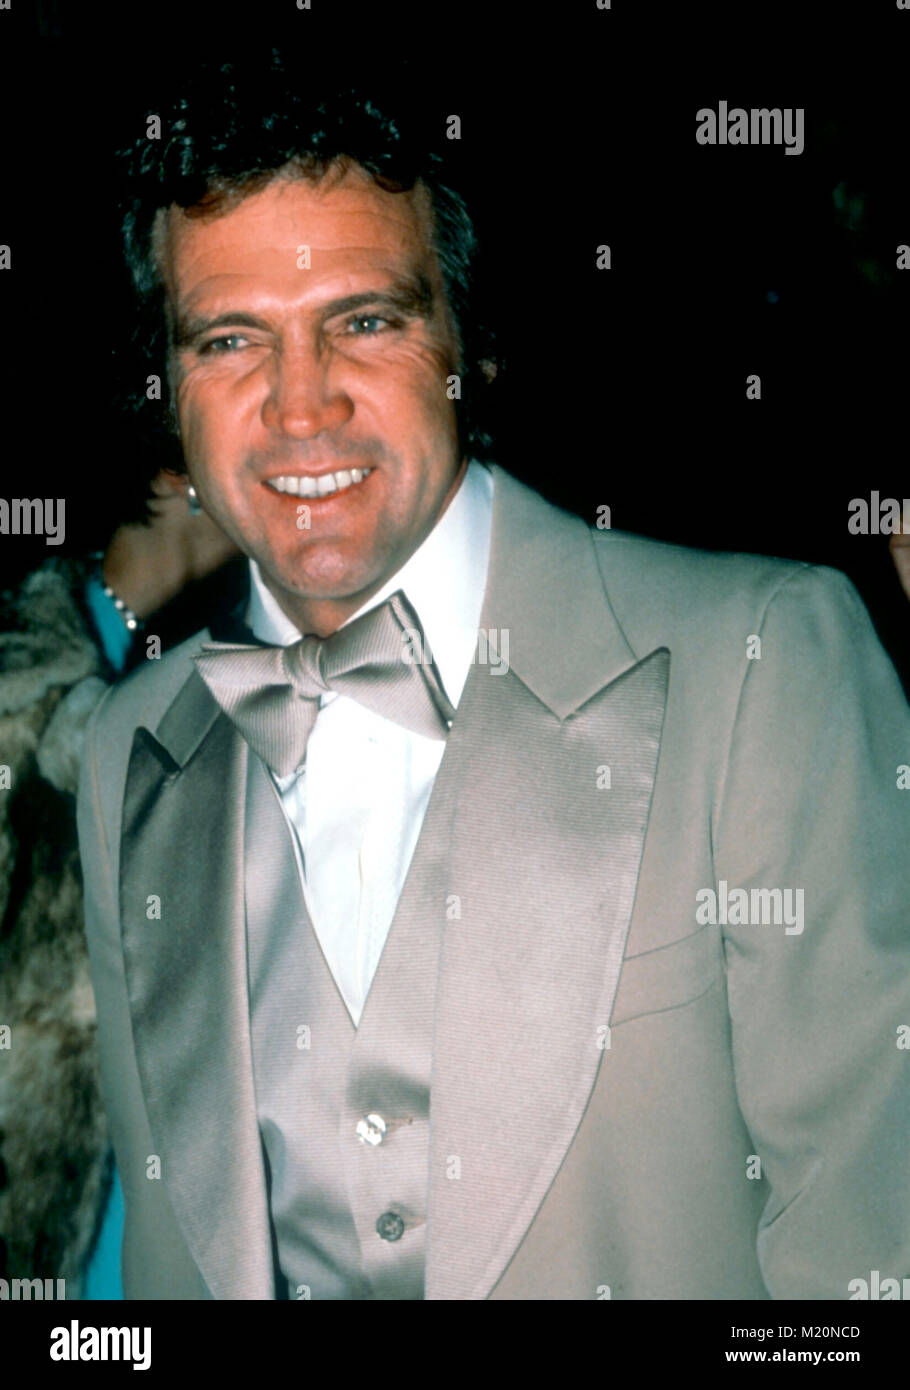 LOS ANGELES, CA - DECEMBER 17: Actor Lee Majors arrives at The Jazz Singer  Premiere on December 17, 1980 in Los Angeles, California. Photo by Barry  King/Alamy Stock Photo Stock Photo - Alamy